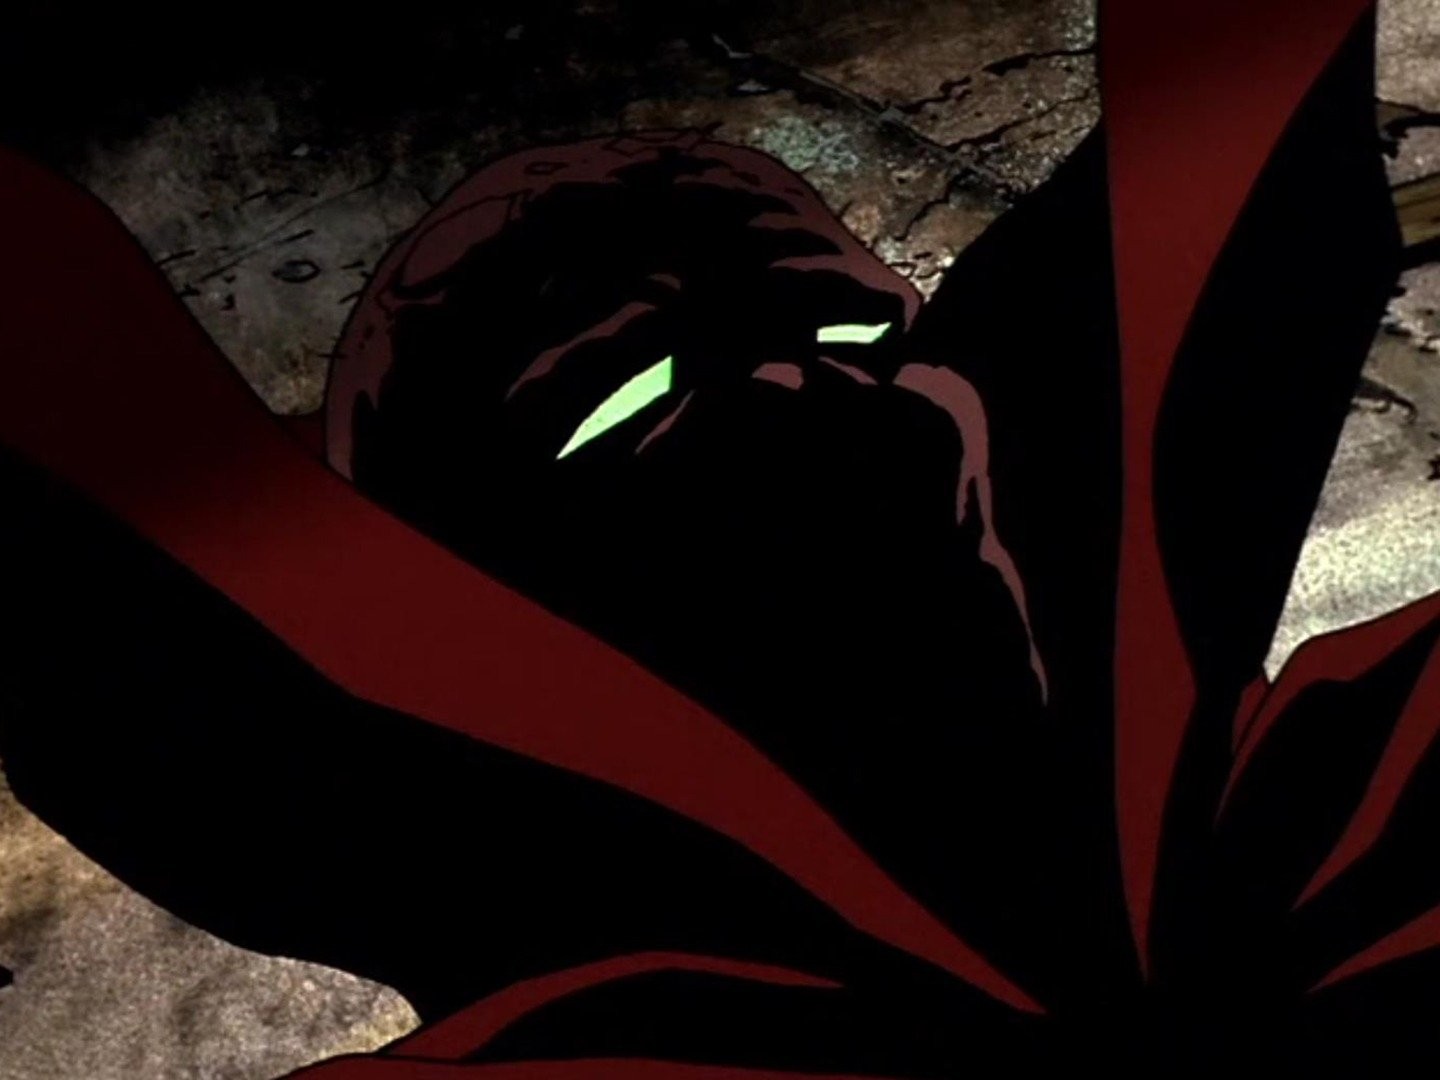 How Spawn Transitioned From Comics to (Very R-Rated) TV